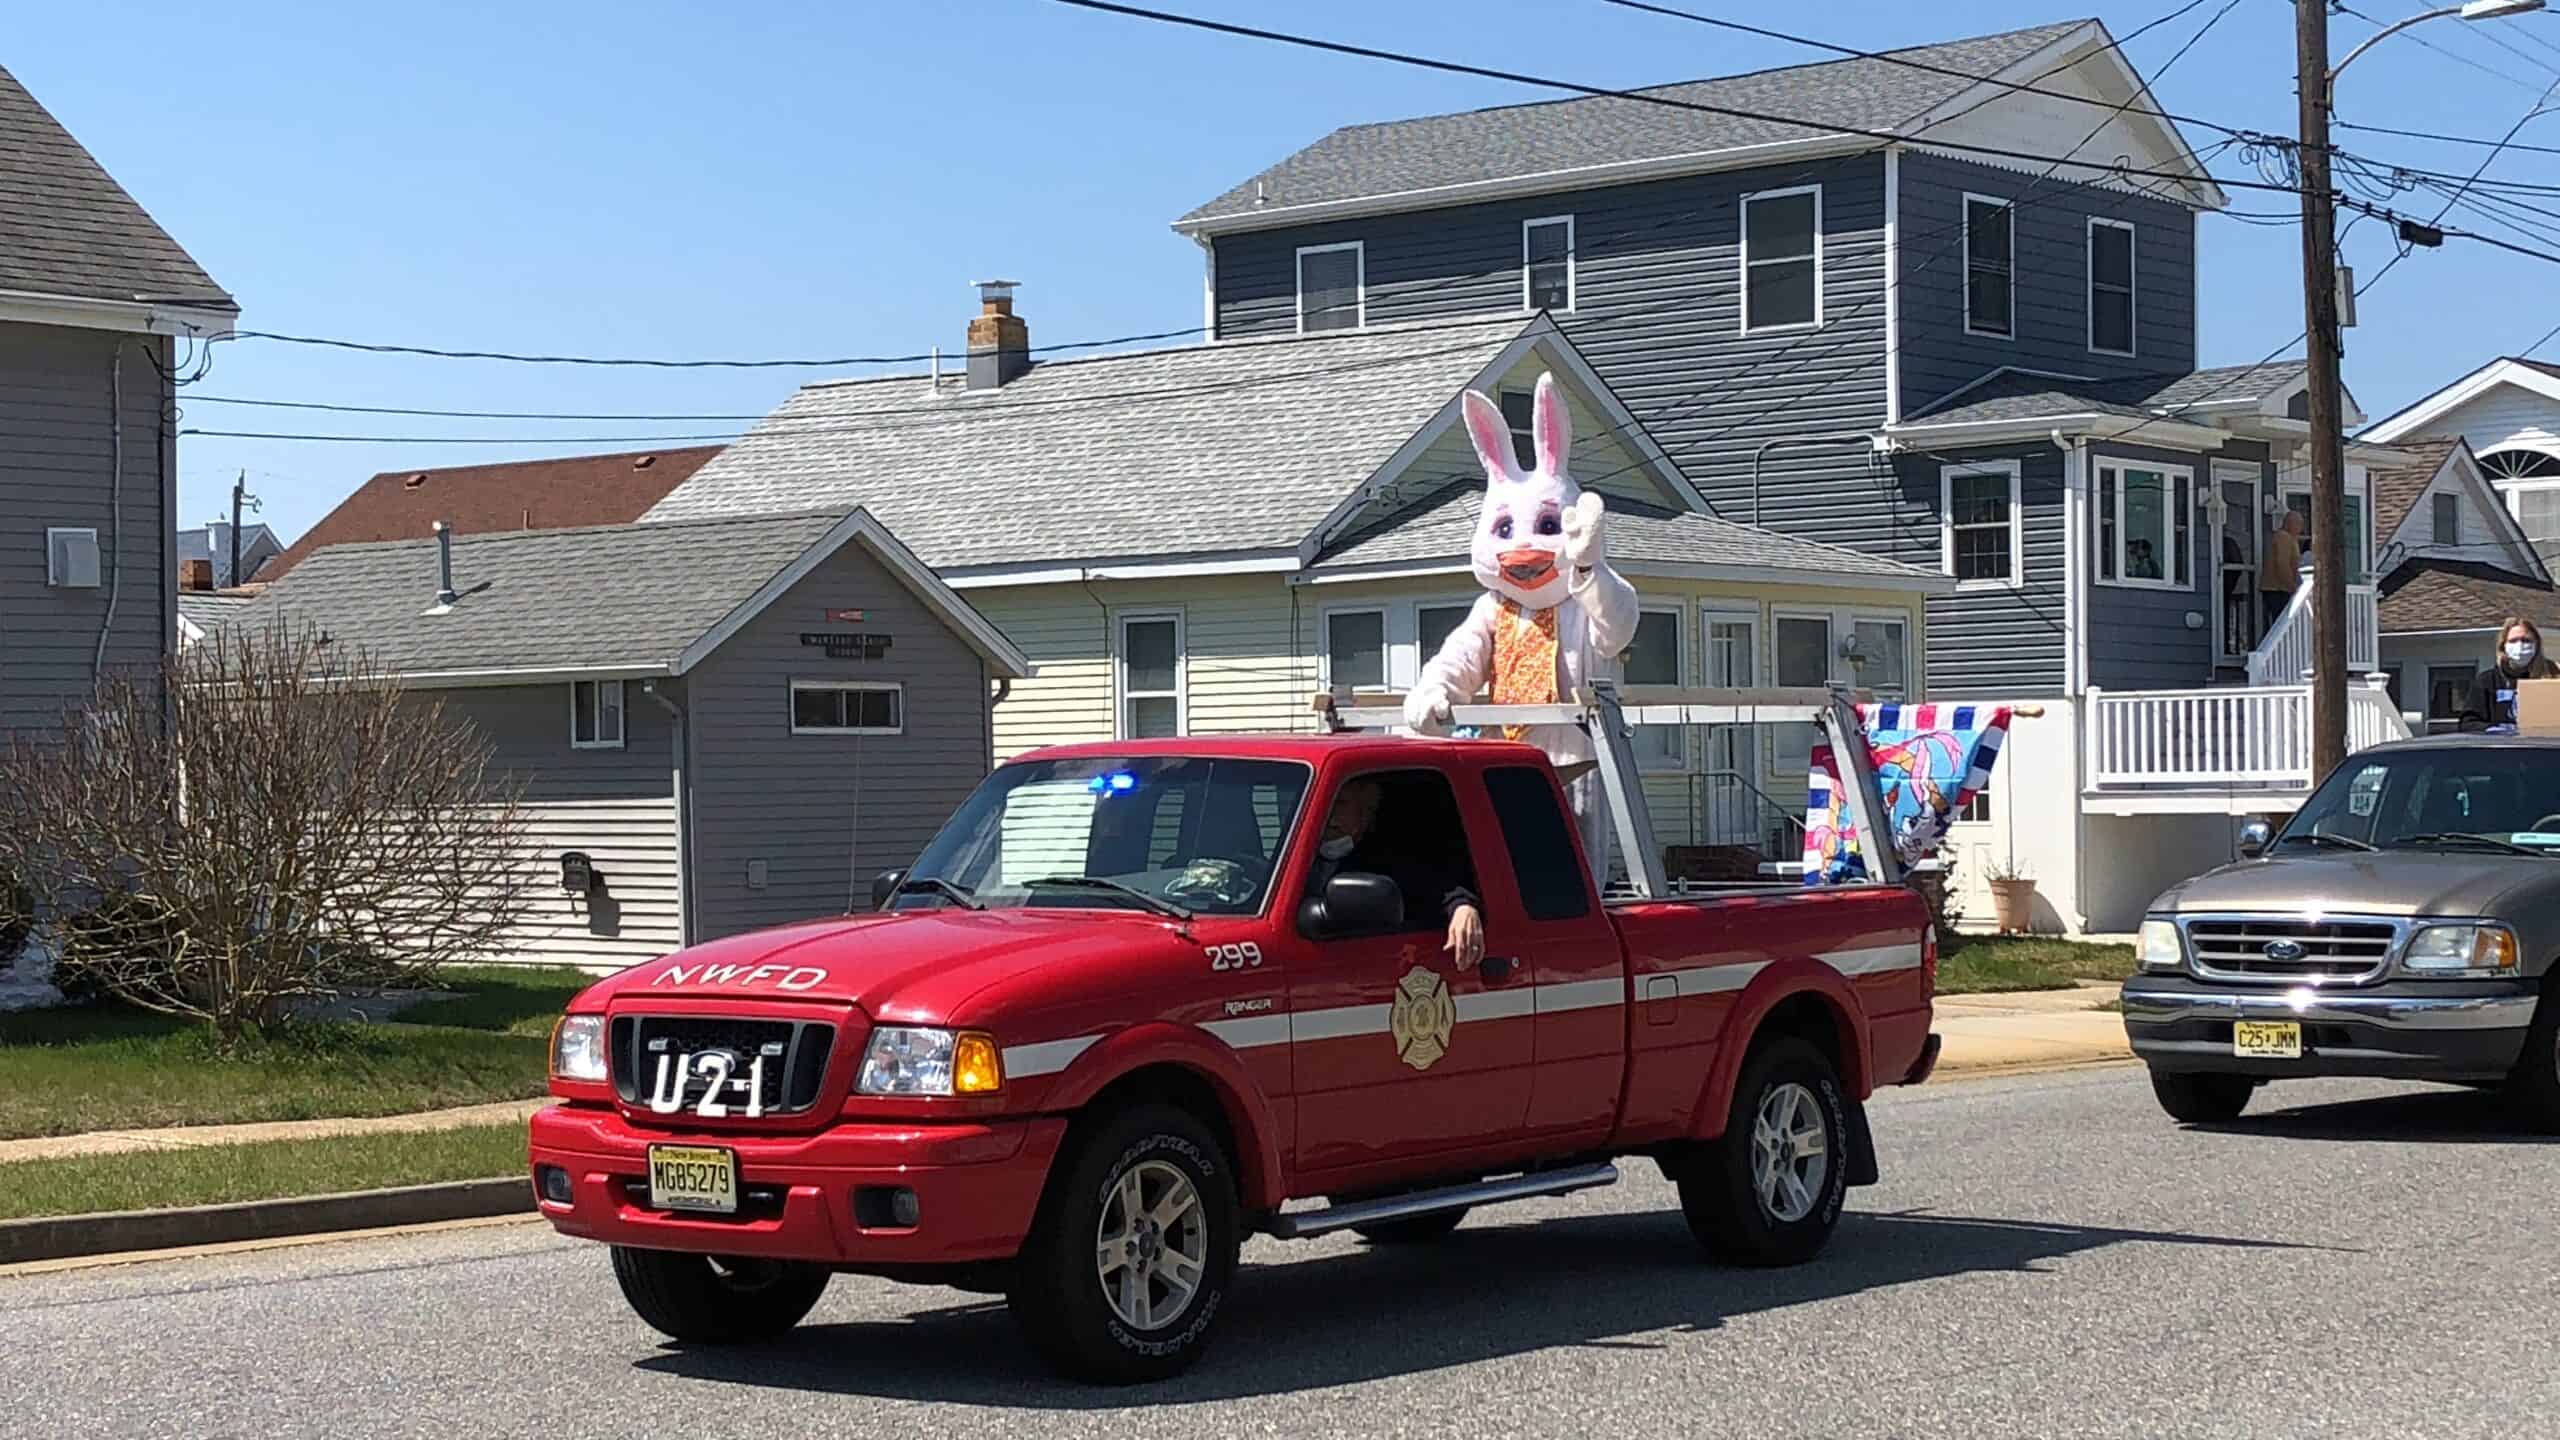 The Easter Bunny Visits Wildwood